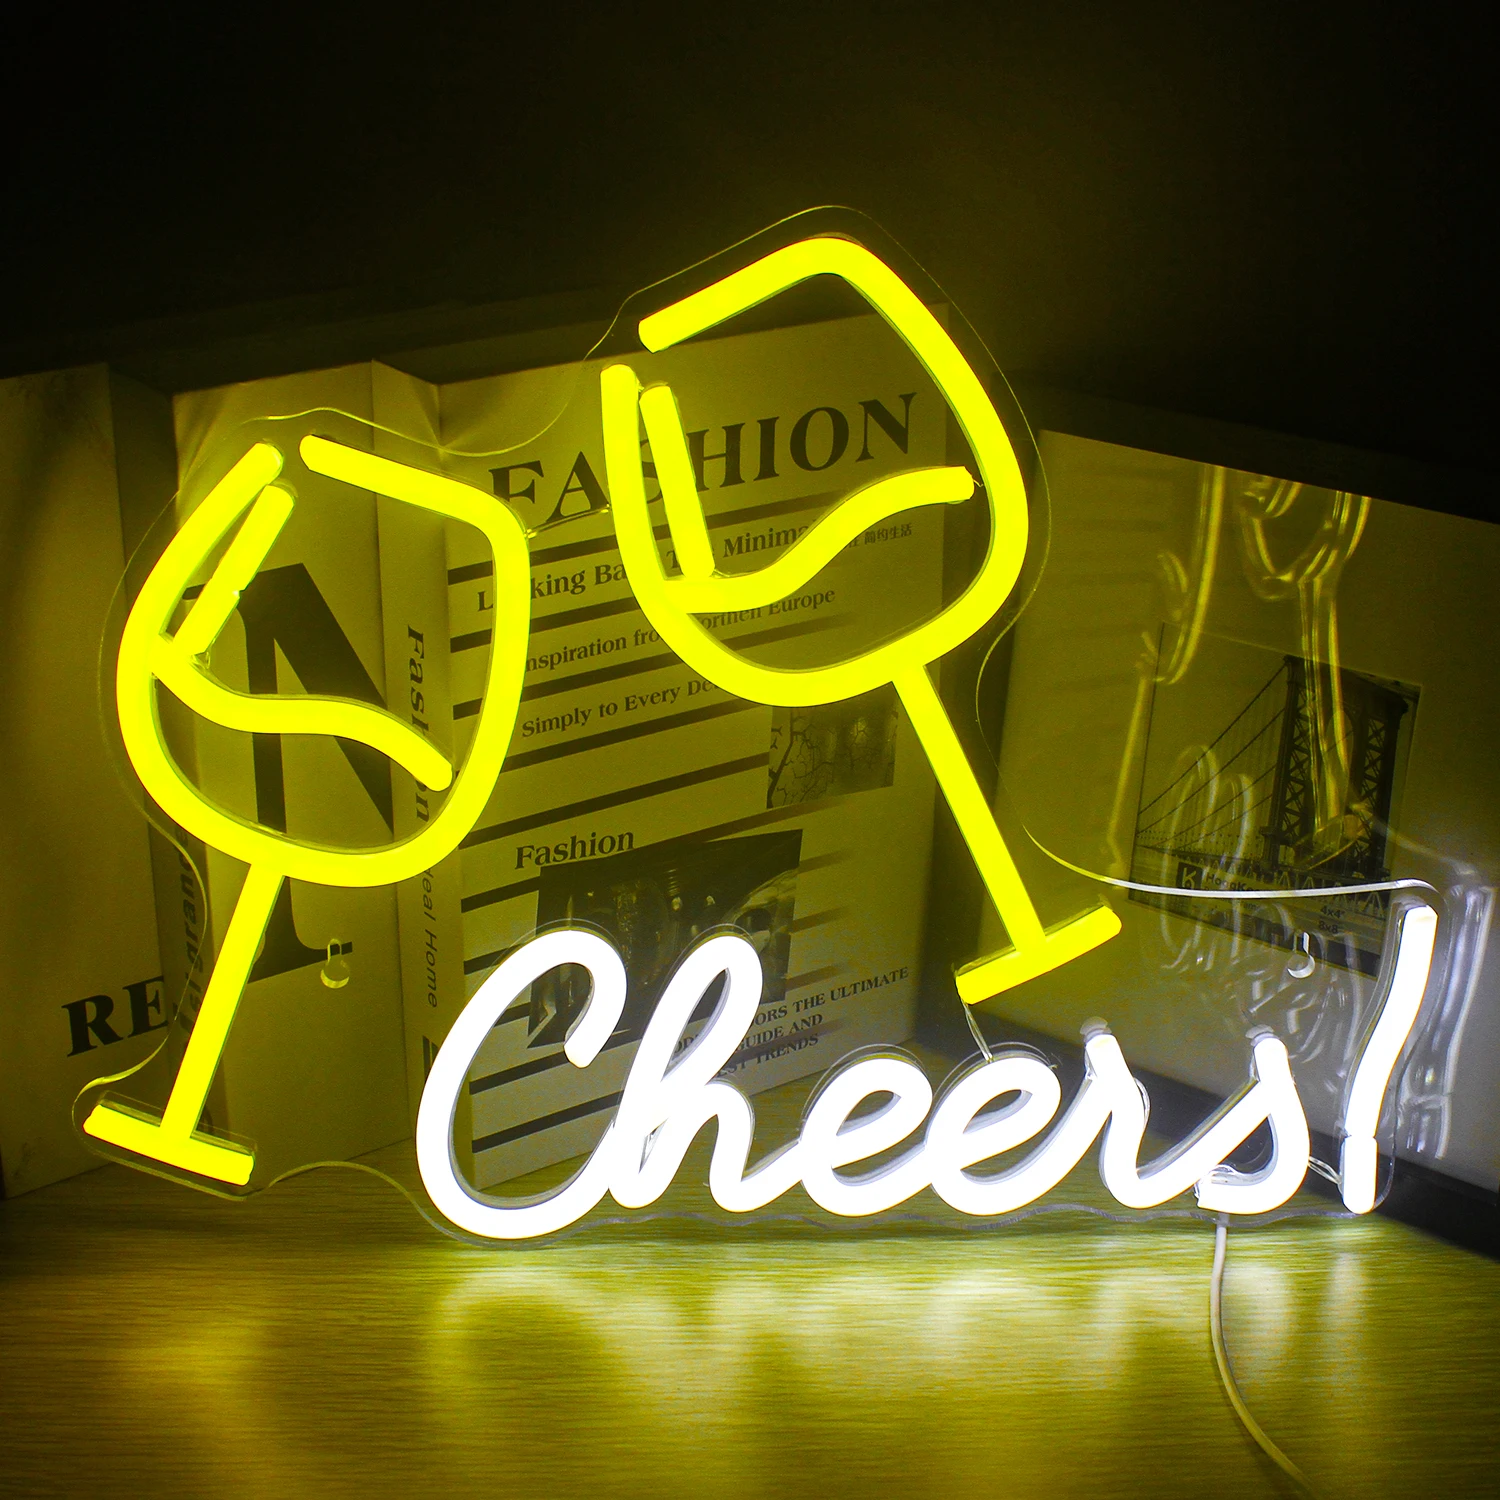 

Wanxing Cheers Neon Sign LED Light USB Powered Acrylic Bar Wedding Club Party Office Children Room Bedroom Wall Decor Lamp Gift